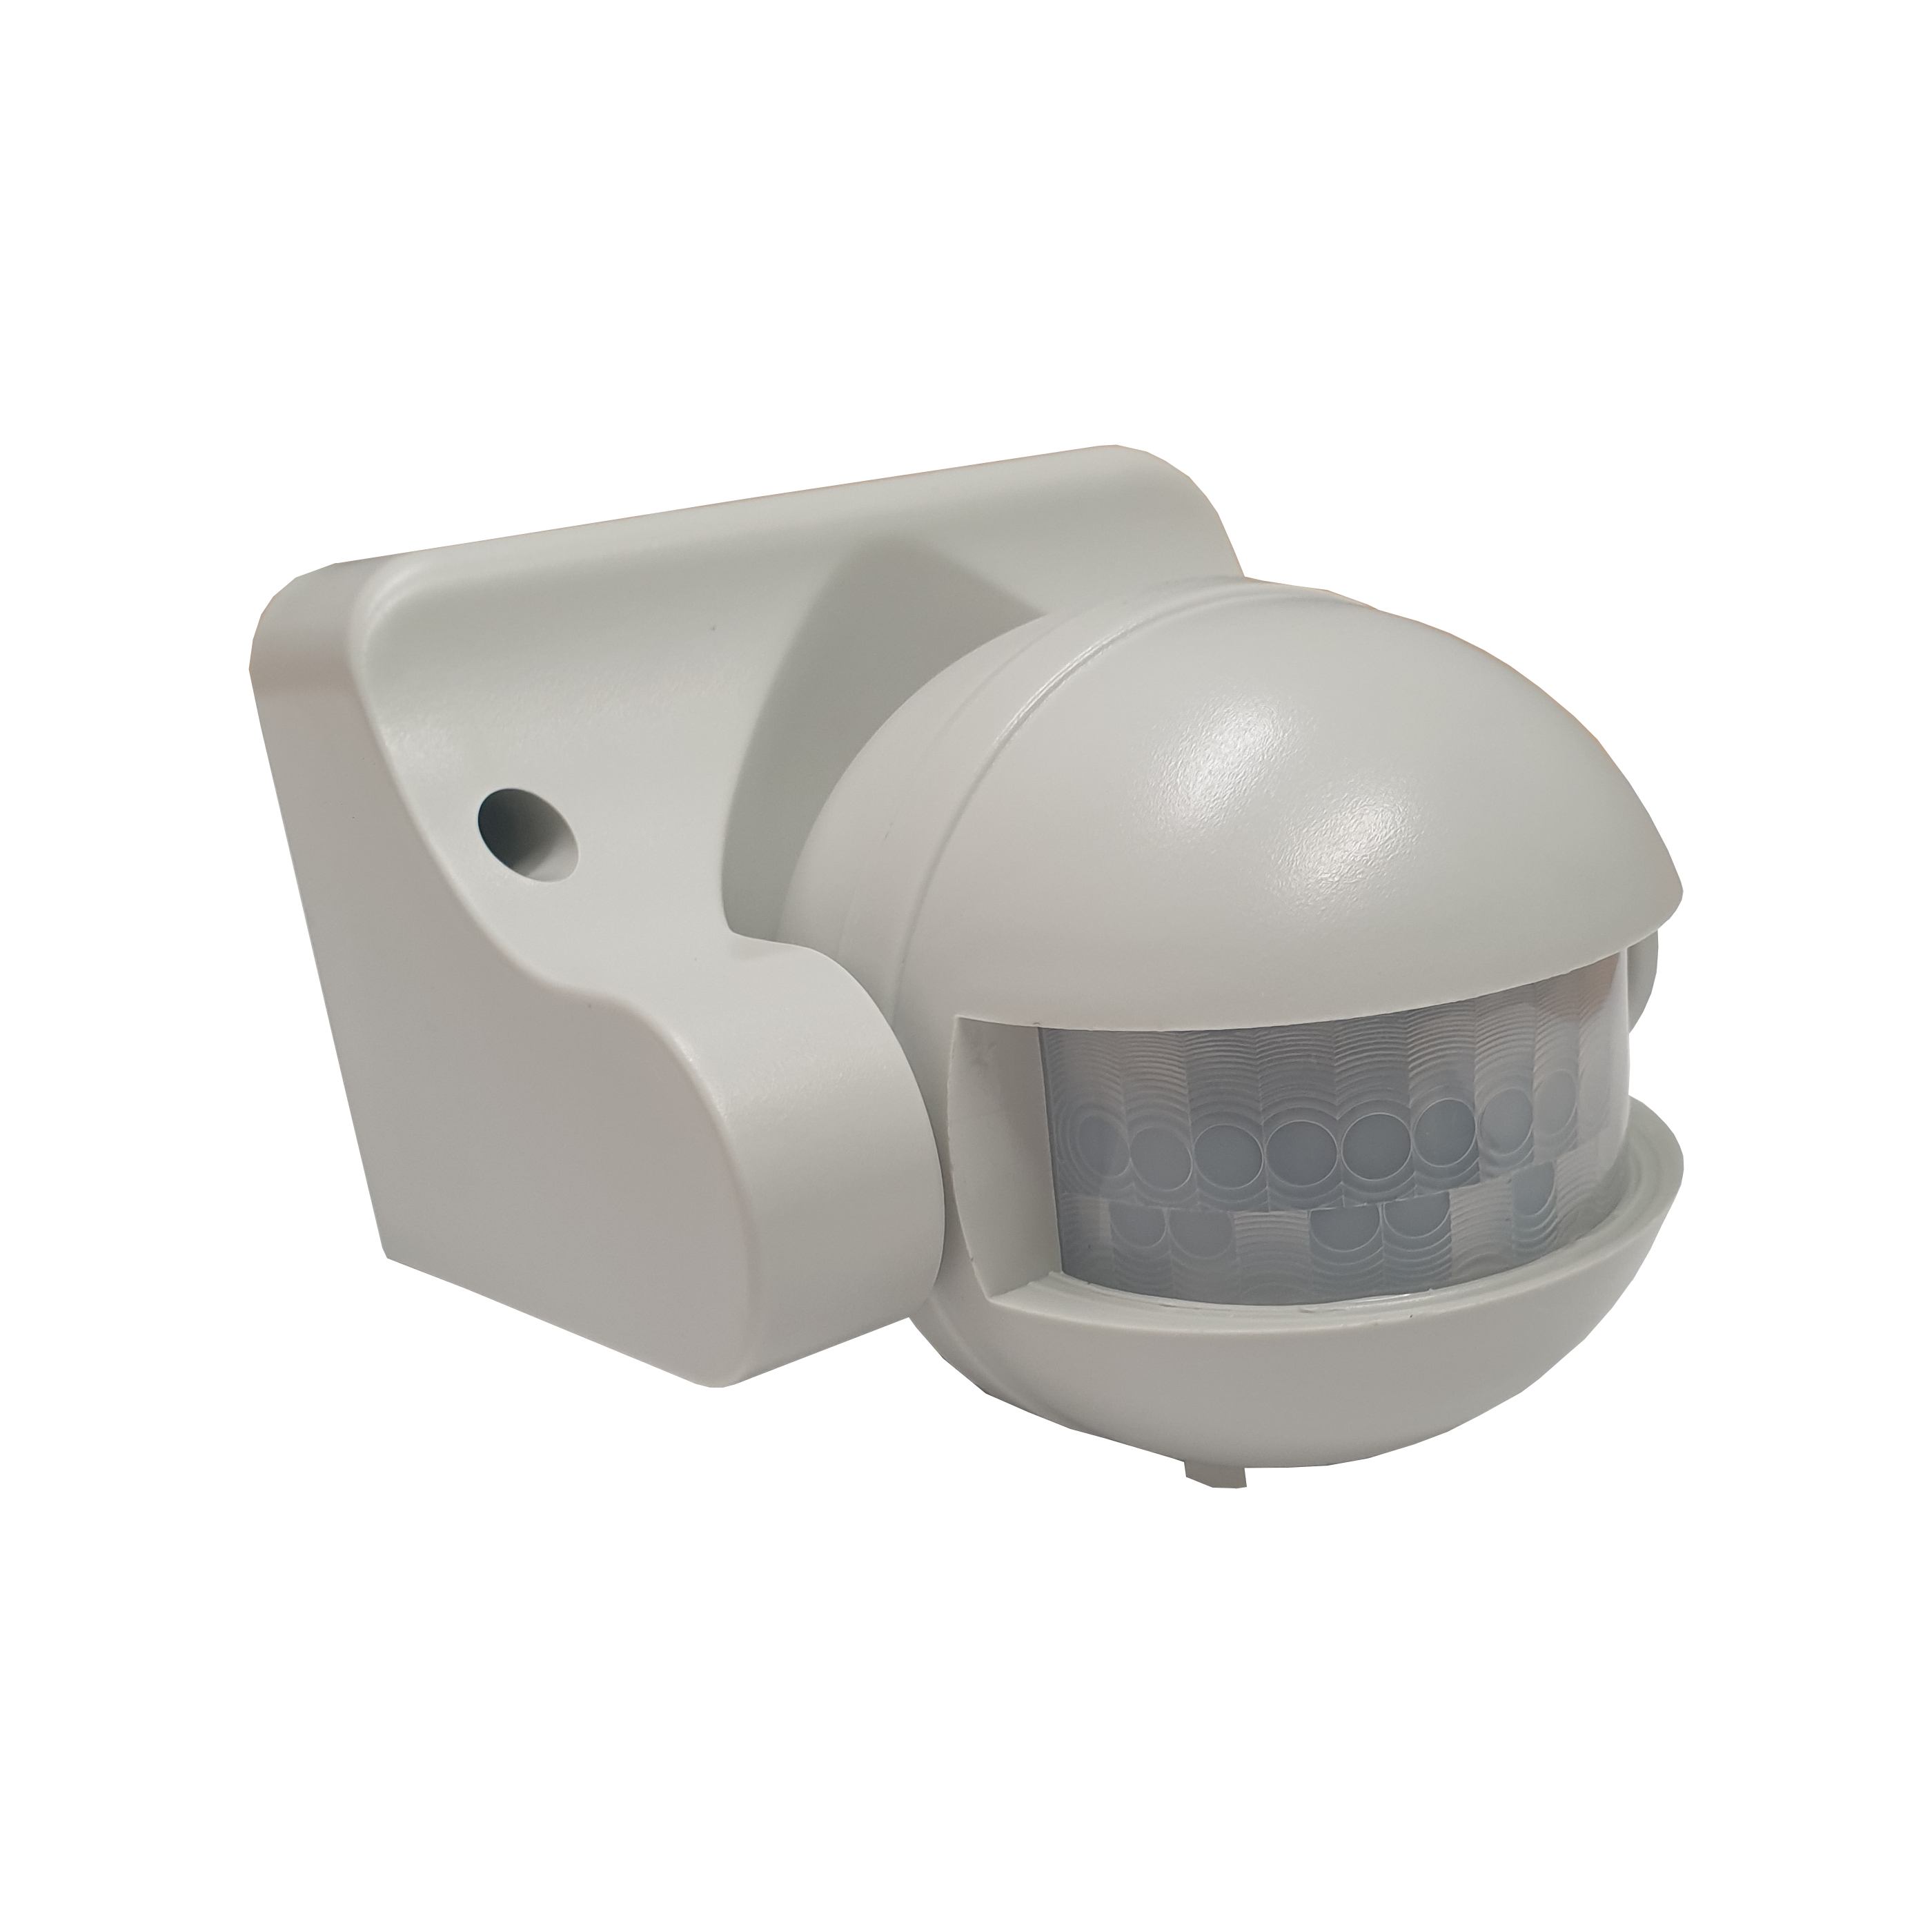 MOTION SENSOR WITH MANUAL OVERRIDE